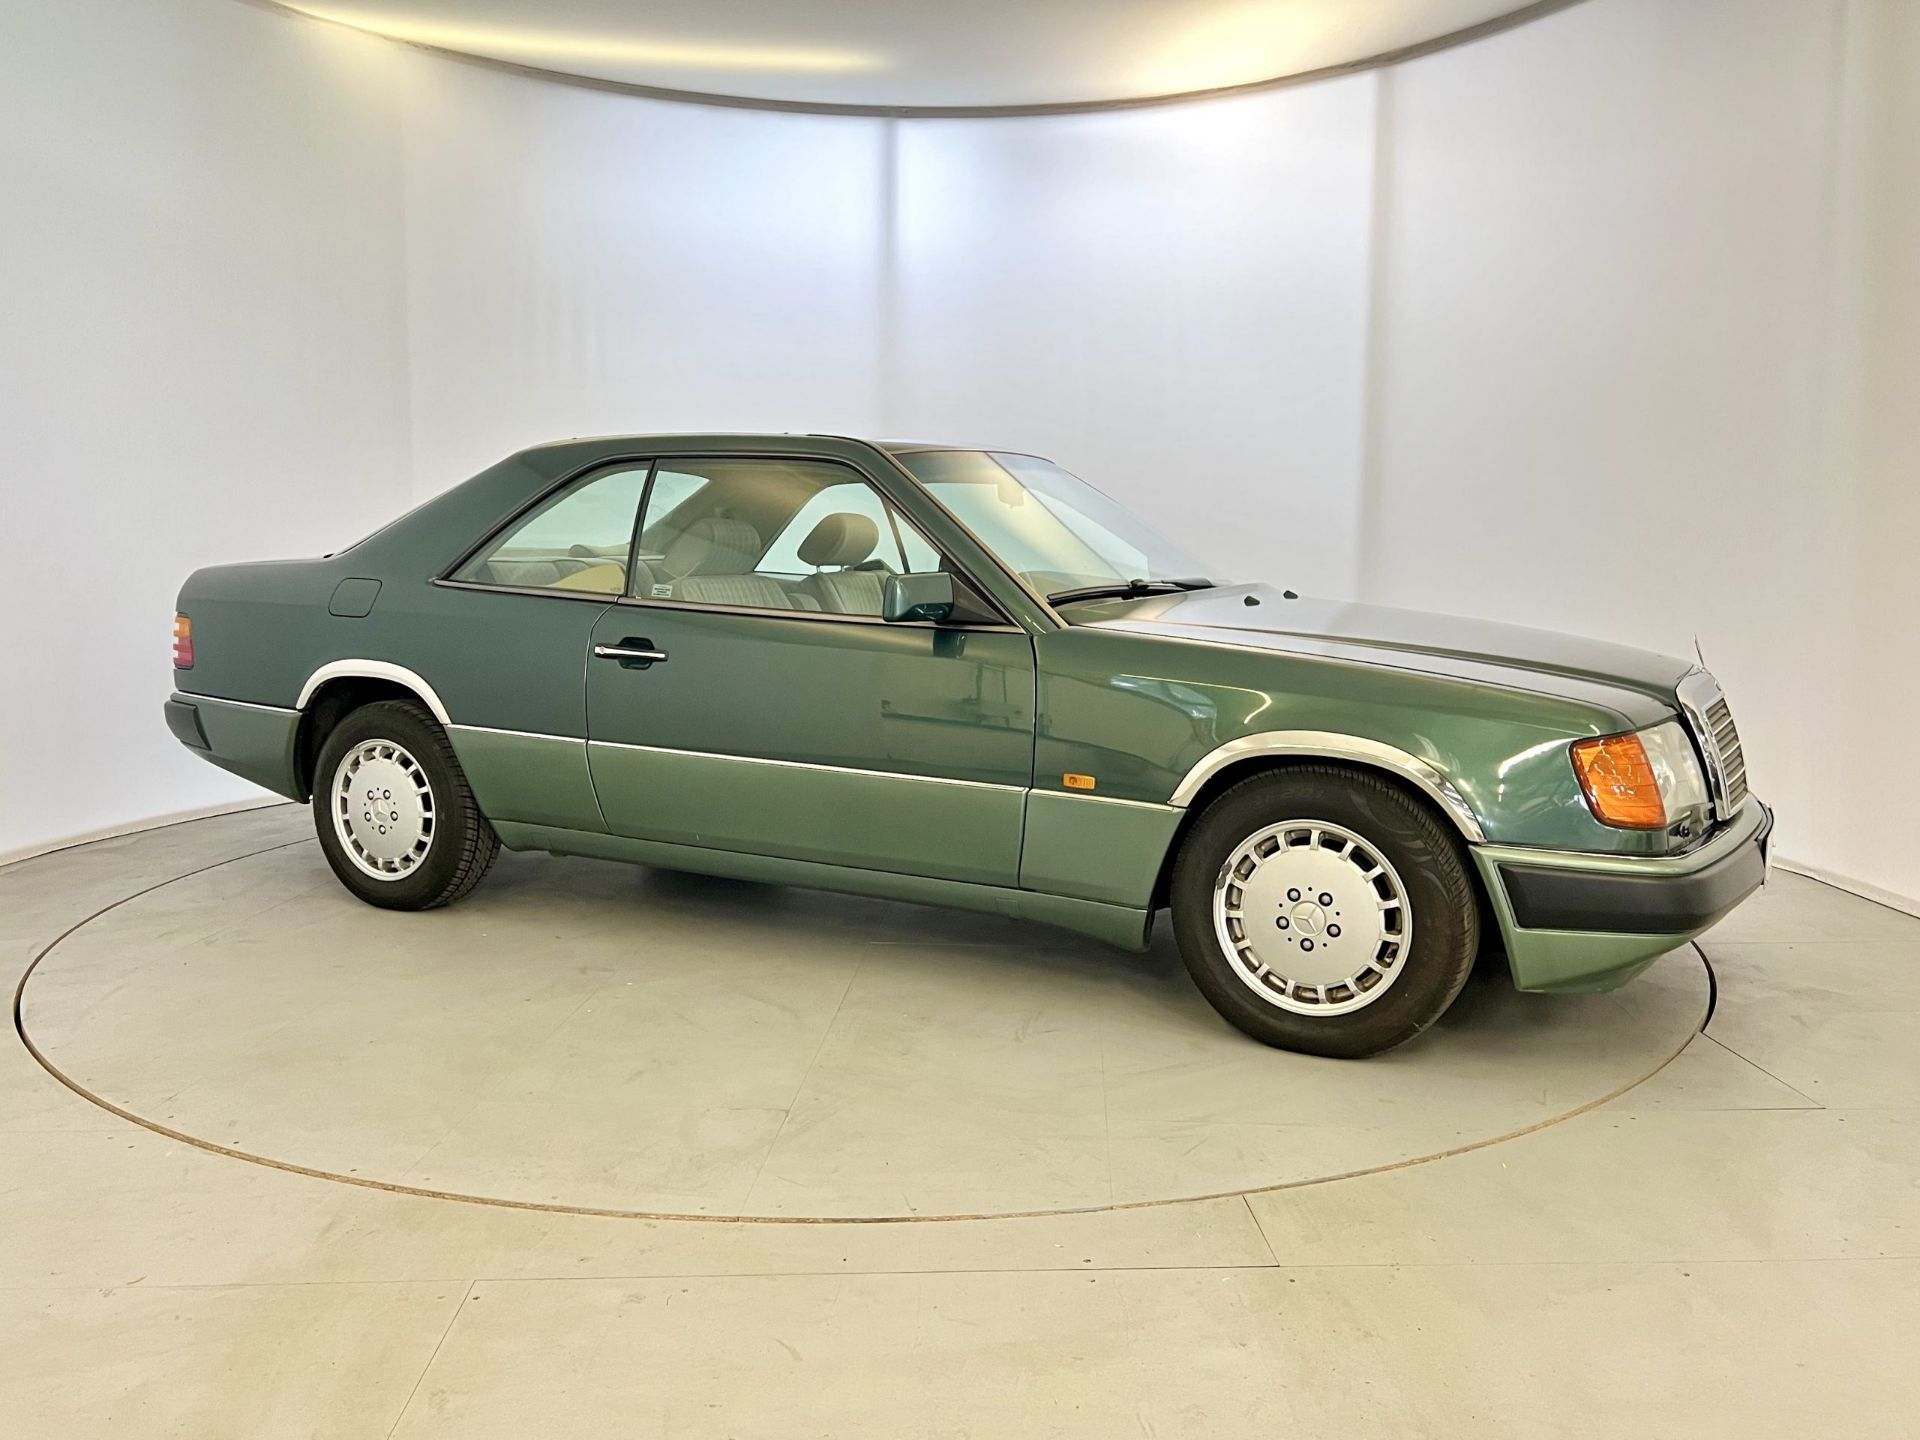 Mercedes 300CE - Image 12 of 30